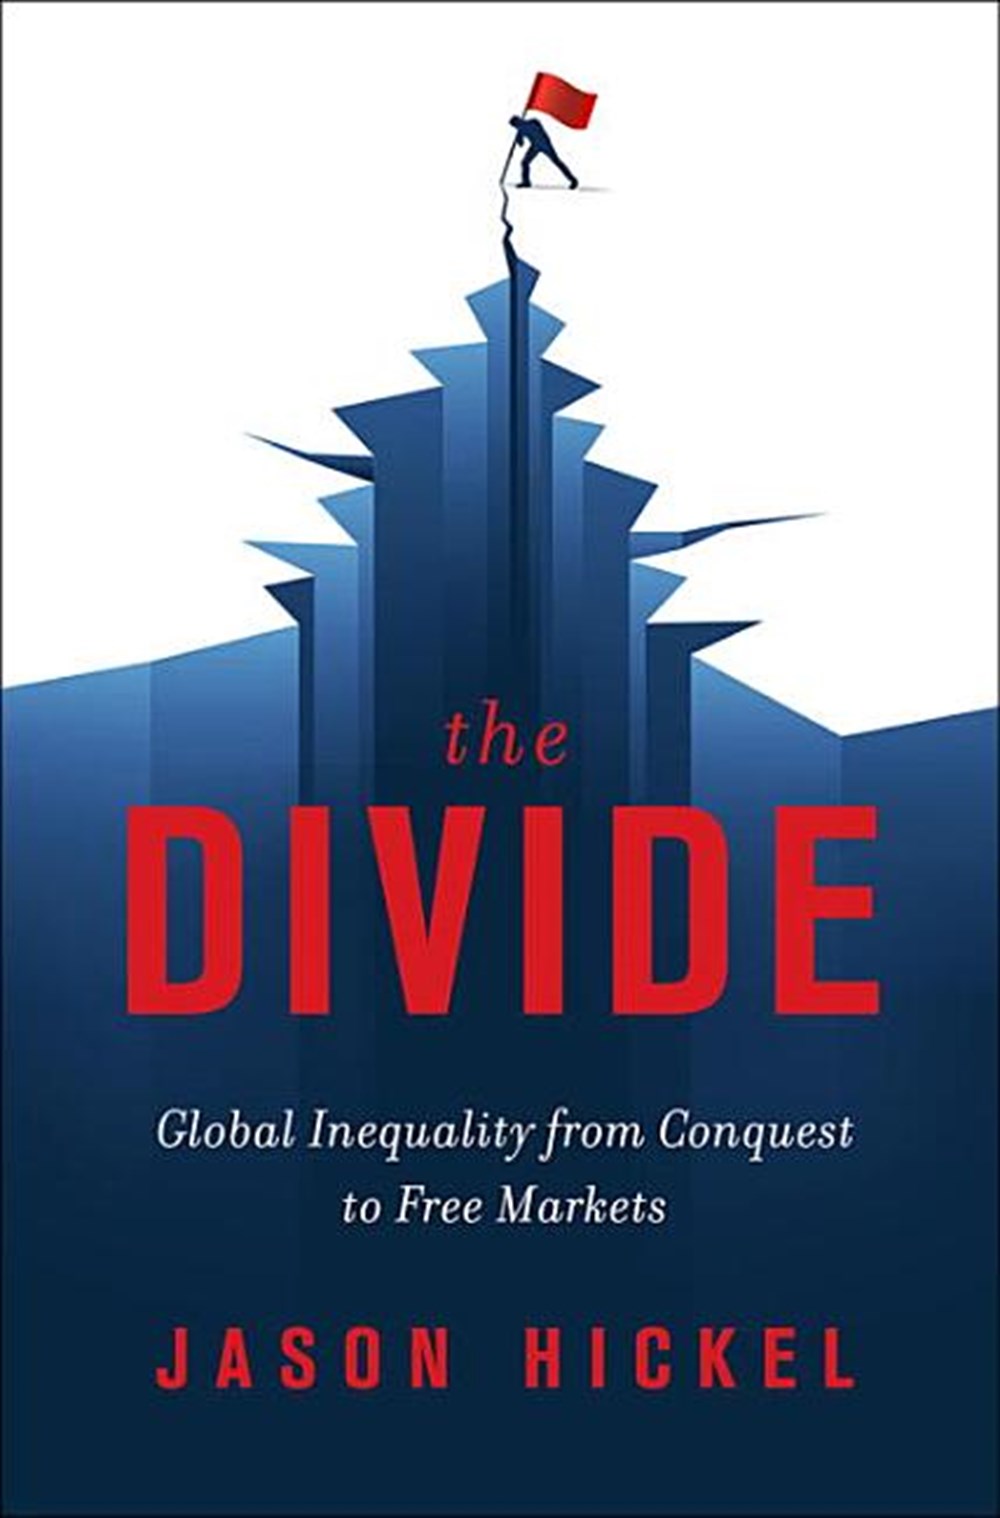 Divide: Global Inequality from Conquest to Free Markets